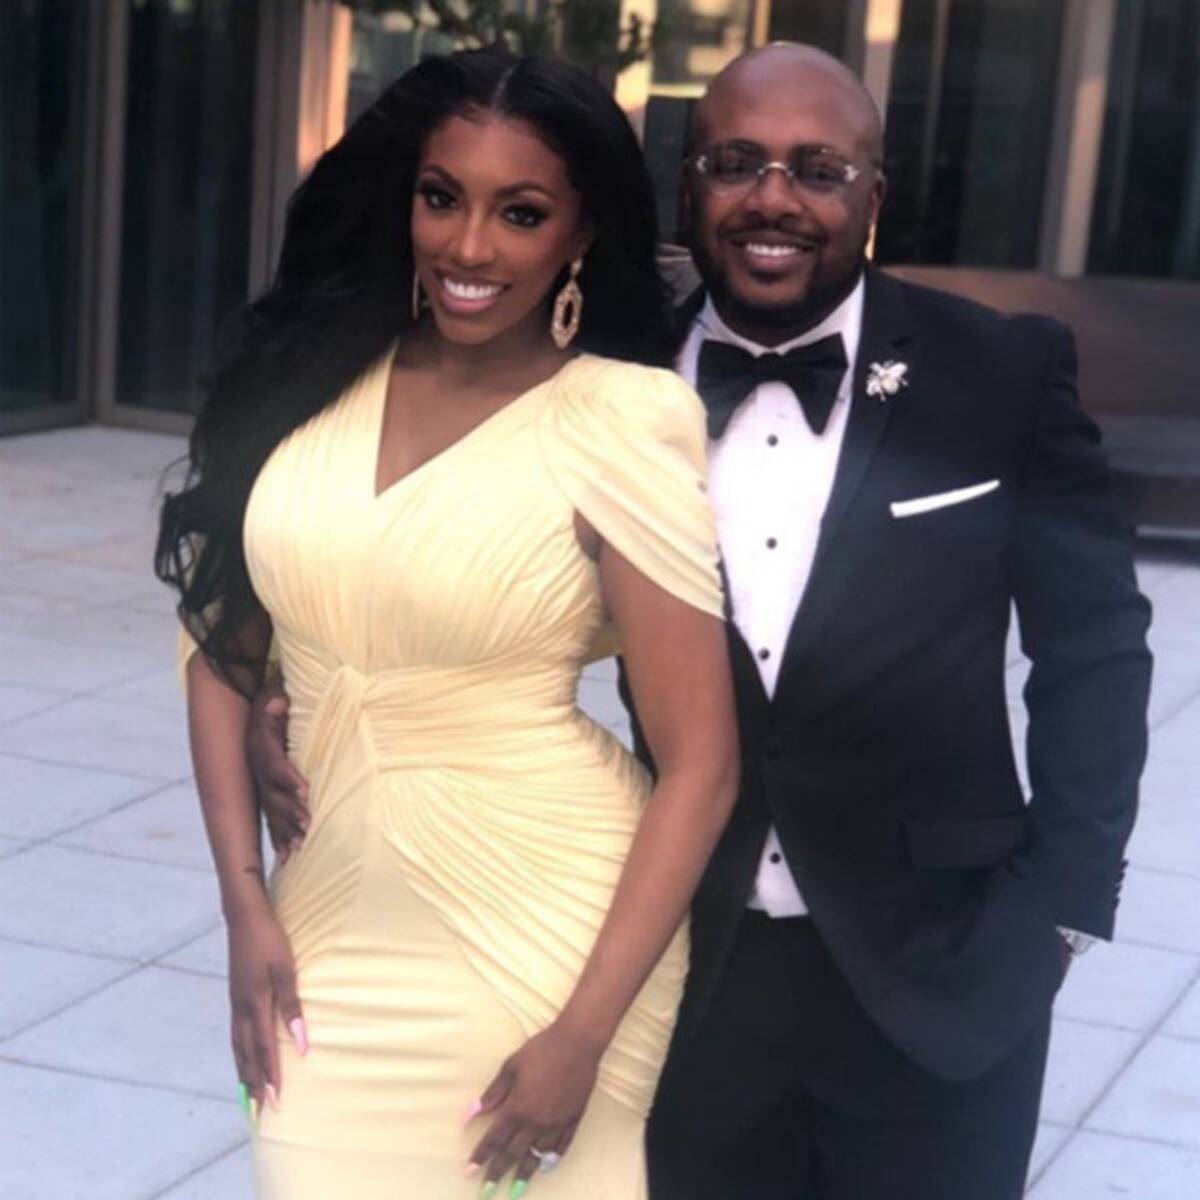 Porsha Williams Has Fans Laughing Their Hearts Out With This Funny Video: 'Dennis Just Called The Police On Me'